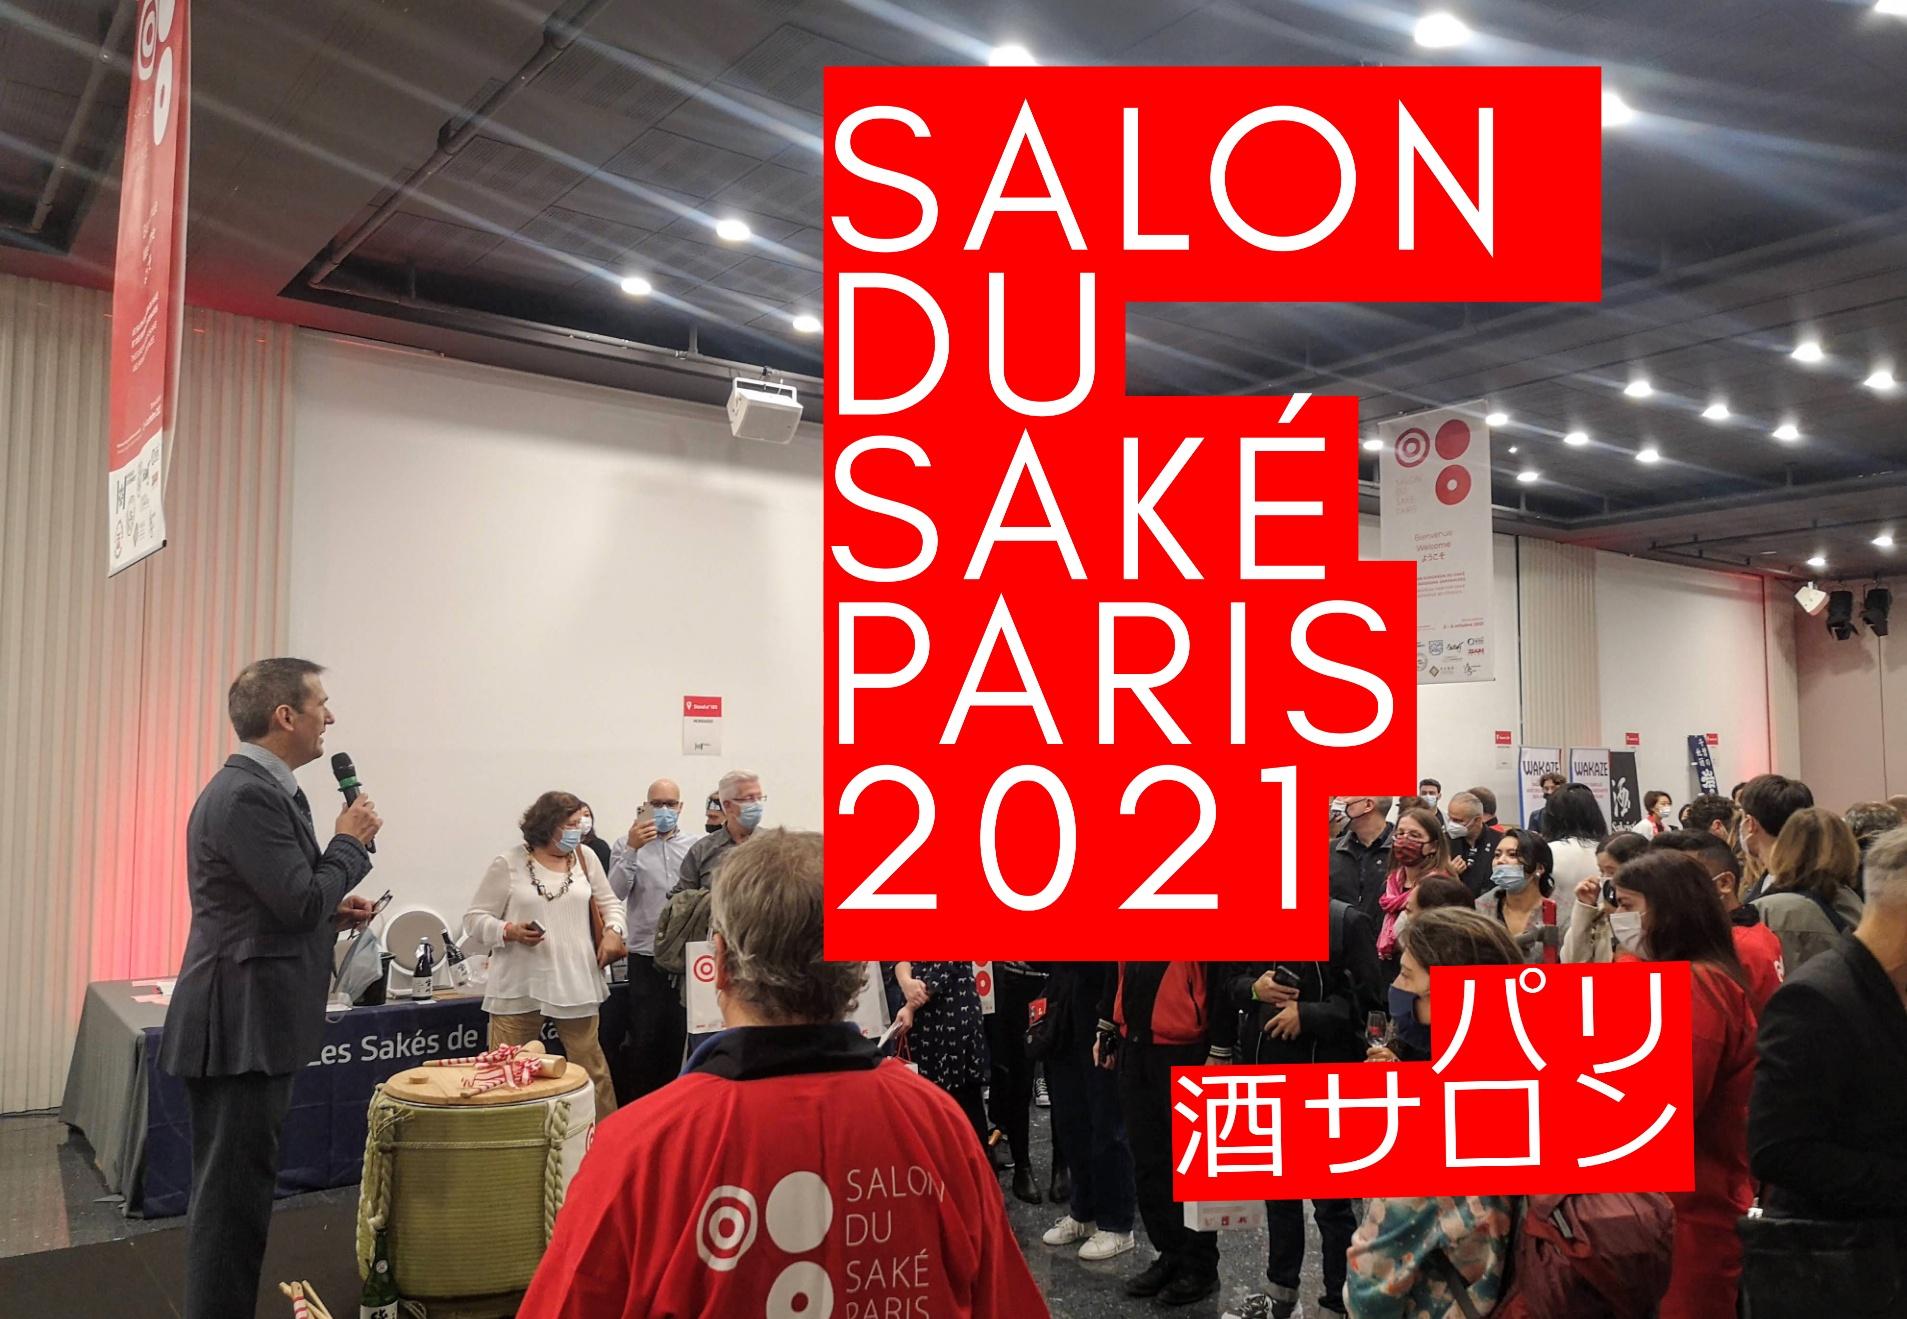 You are currently viewing 欧州最大の日本酒イベント・Salon du Saké 2021 パリ酒サロン開催！